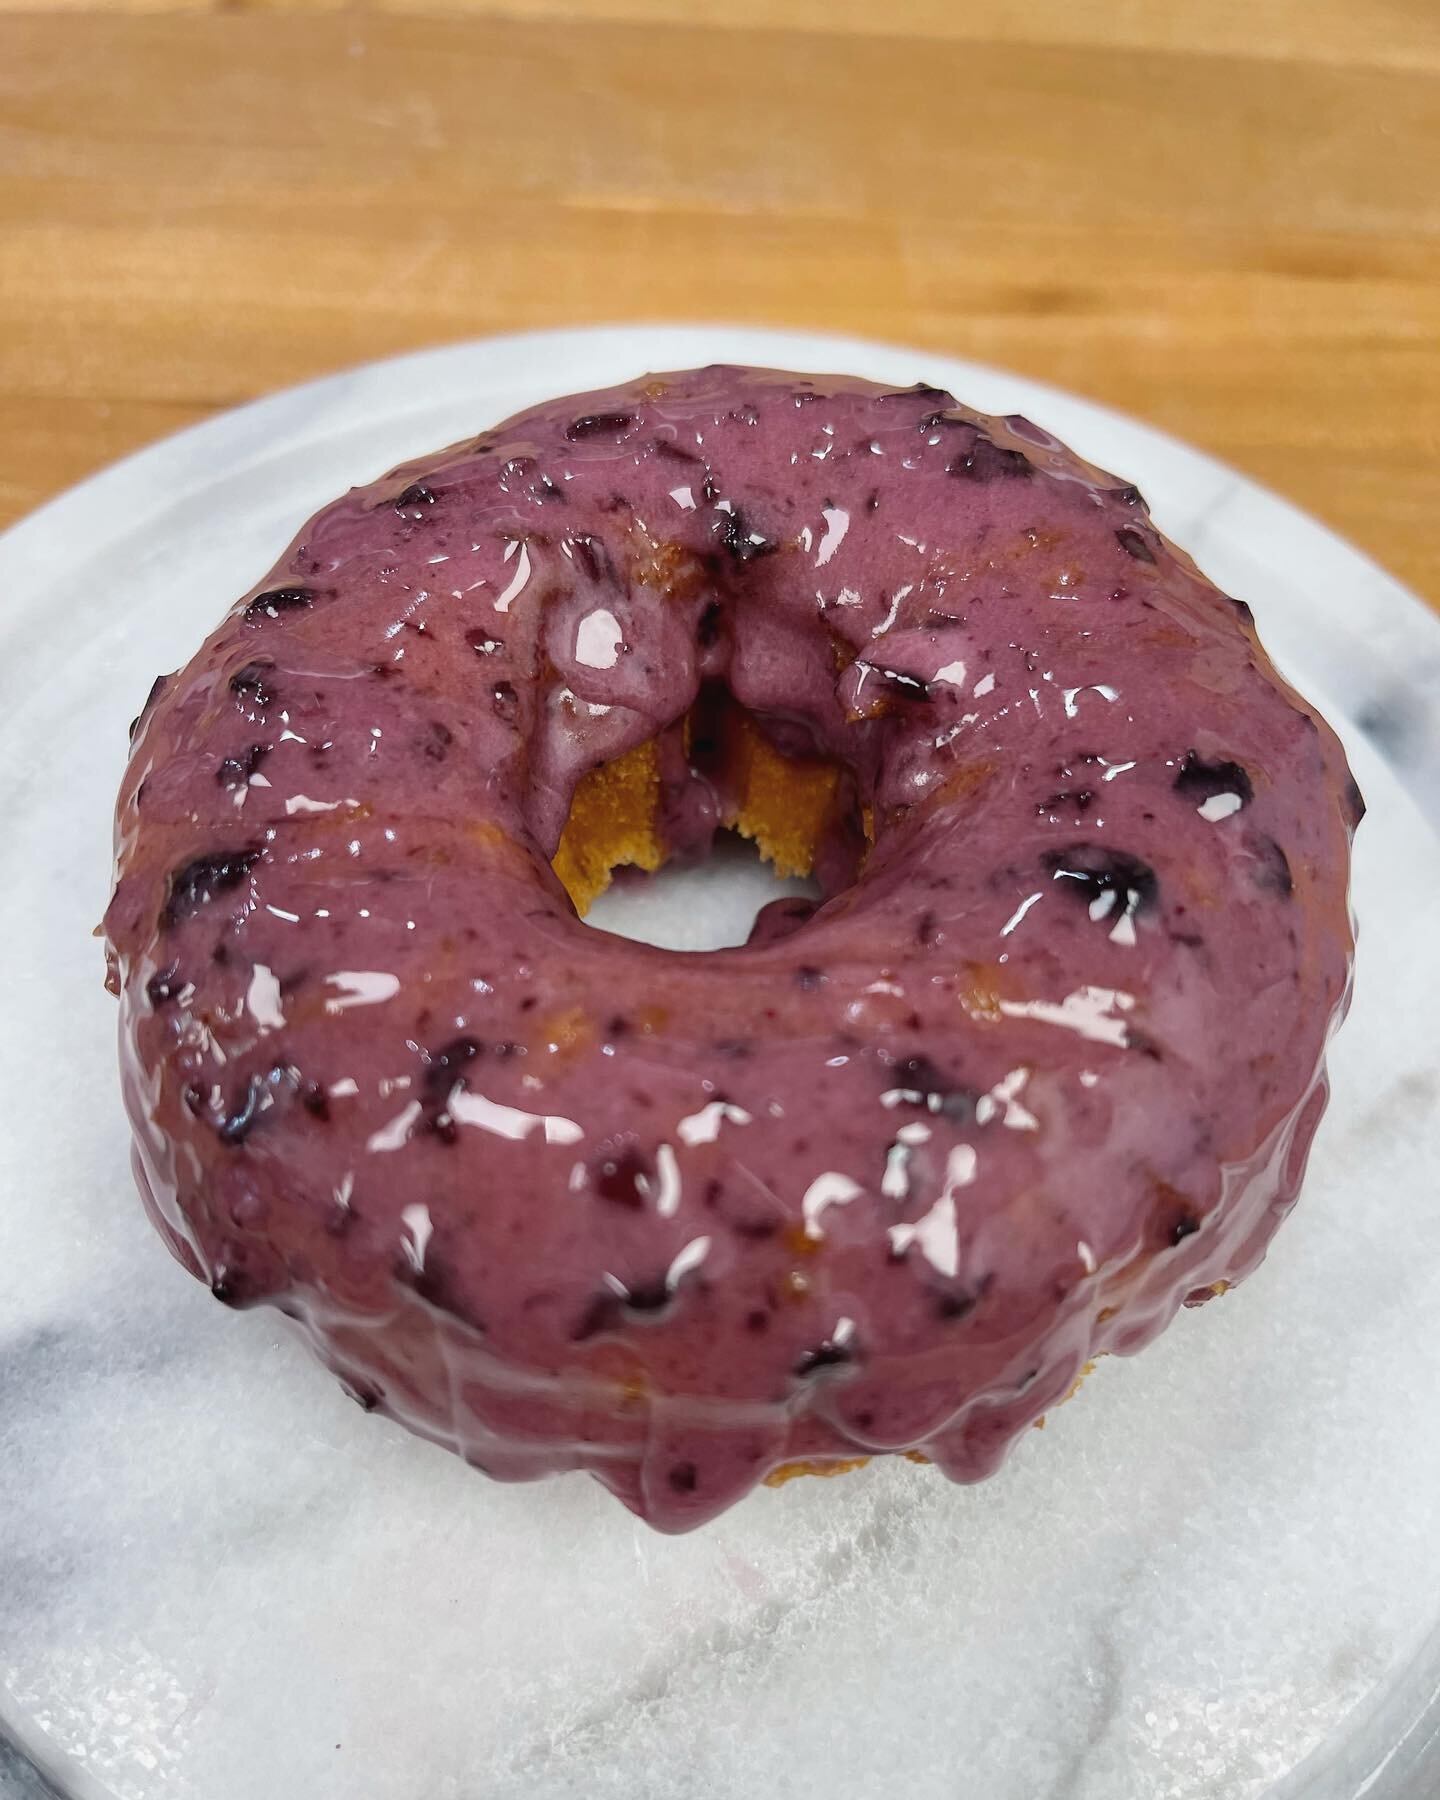 Y&rsquo;all loved it so much so&hellip;it&rsquo;s here to stay! Our fresh blueberry glaze is now a permanent addition to our year-long menu, replacing our orange glaze. 🫐 ✨

Don&rsquo;t worry you&rsquo;ll see our orange glaze again soon. 🤫